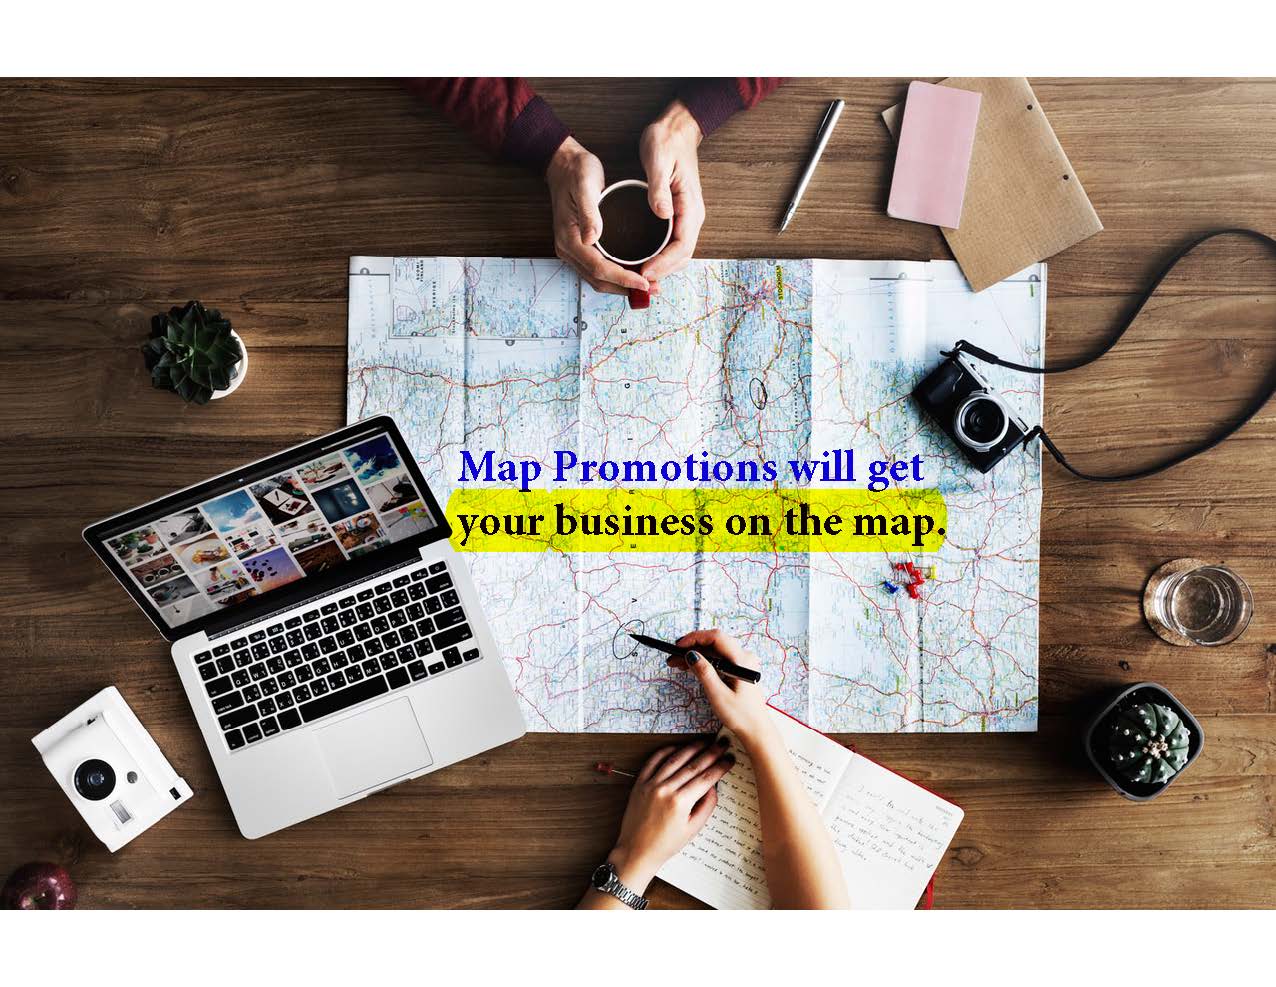 <a href="https://mappromotions.com/2018/03/12/market-your-business-blog/">We Can Help You Find Your Ideal Customers.</a><br/><p>